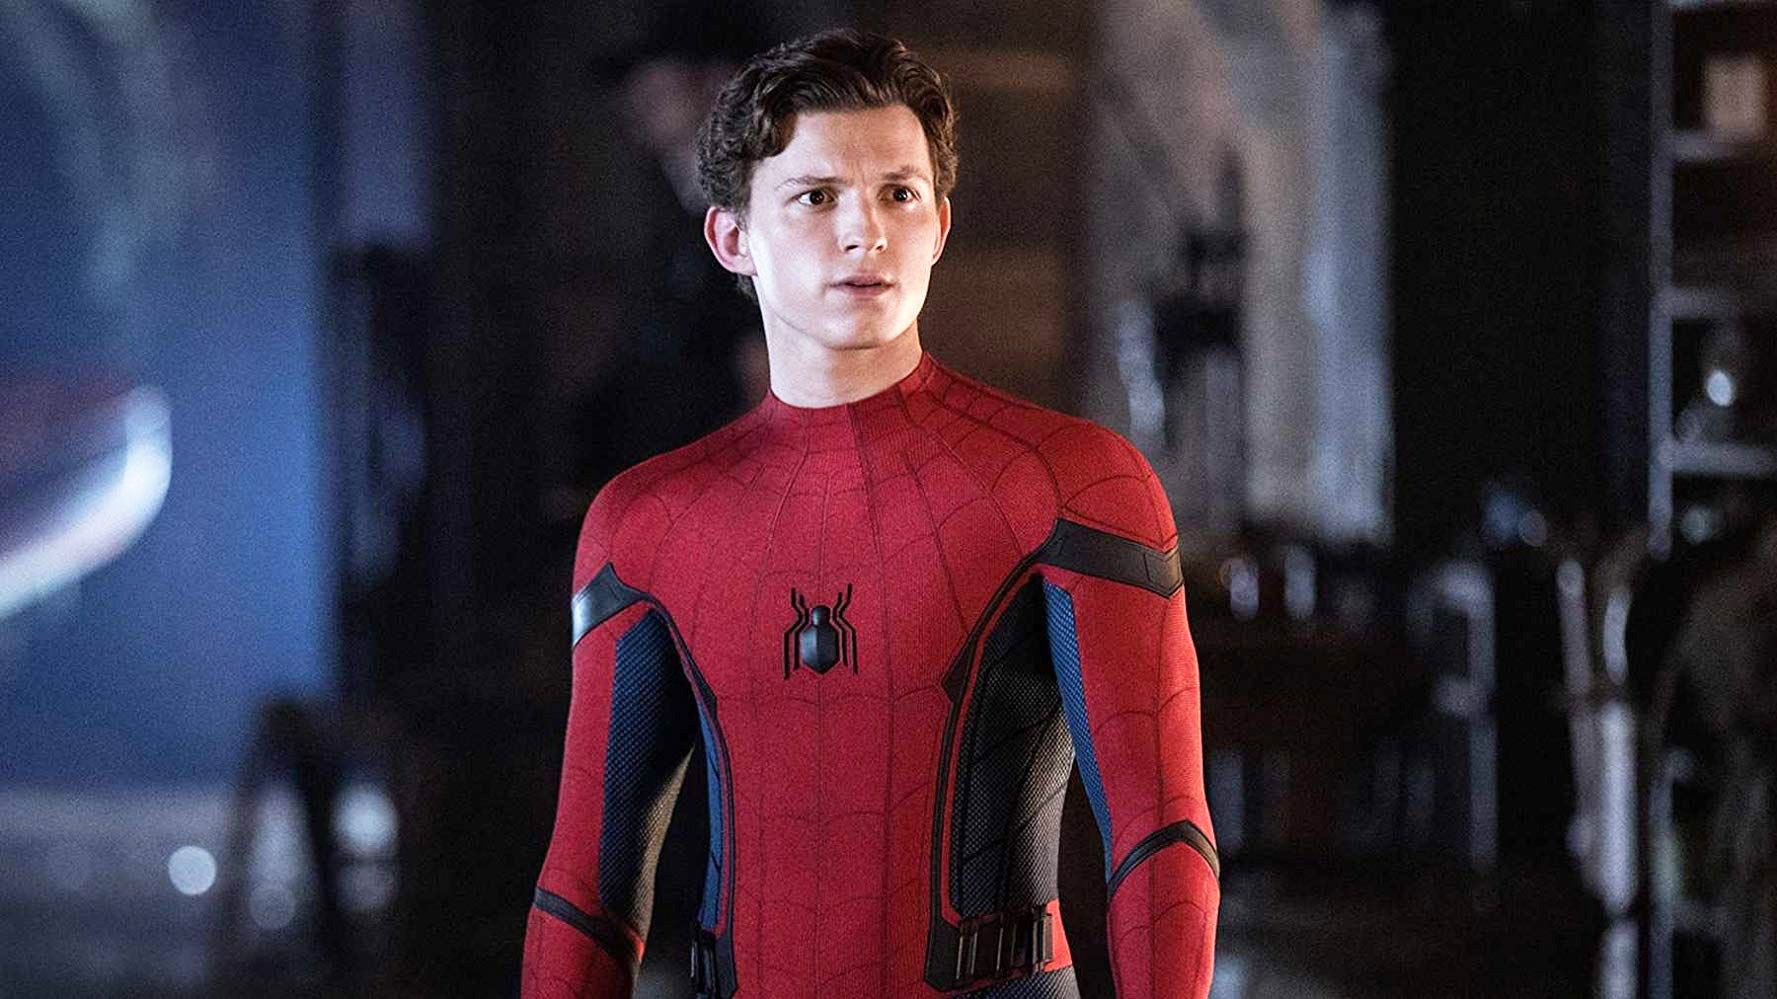 Is Tom Holland Leaving the Marvel Cinematic Universe and Spider-Man?